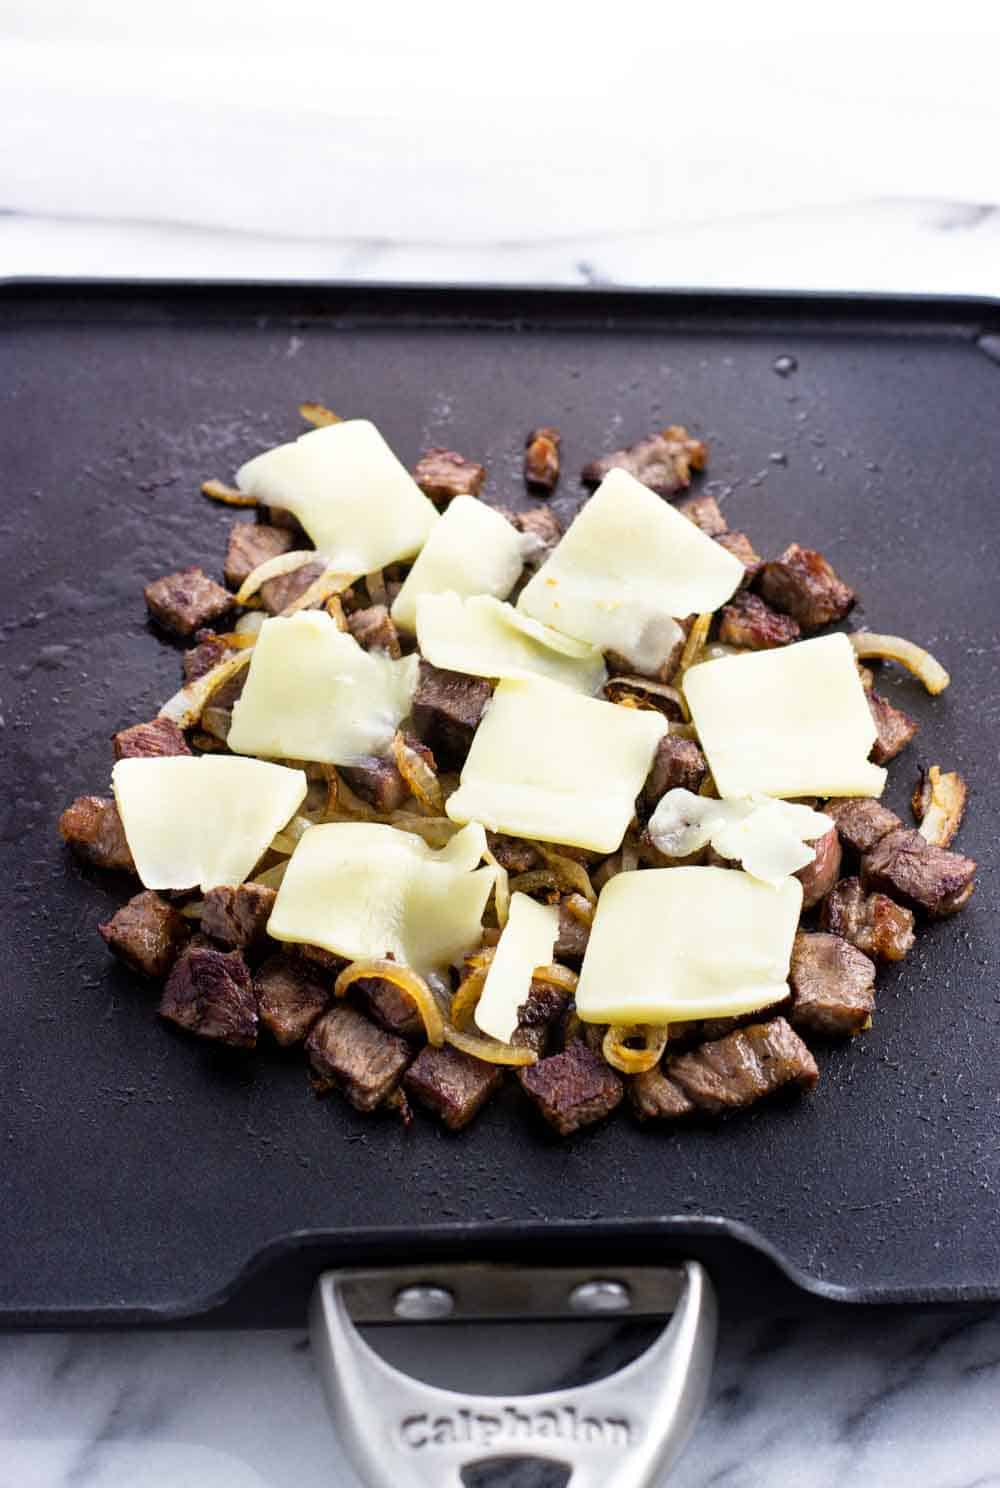 Pieces of cheese on top of the steak and onion on the pan.